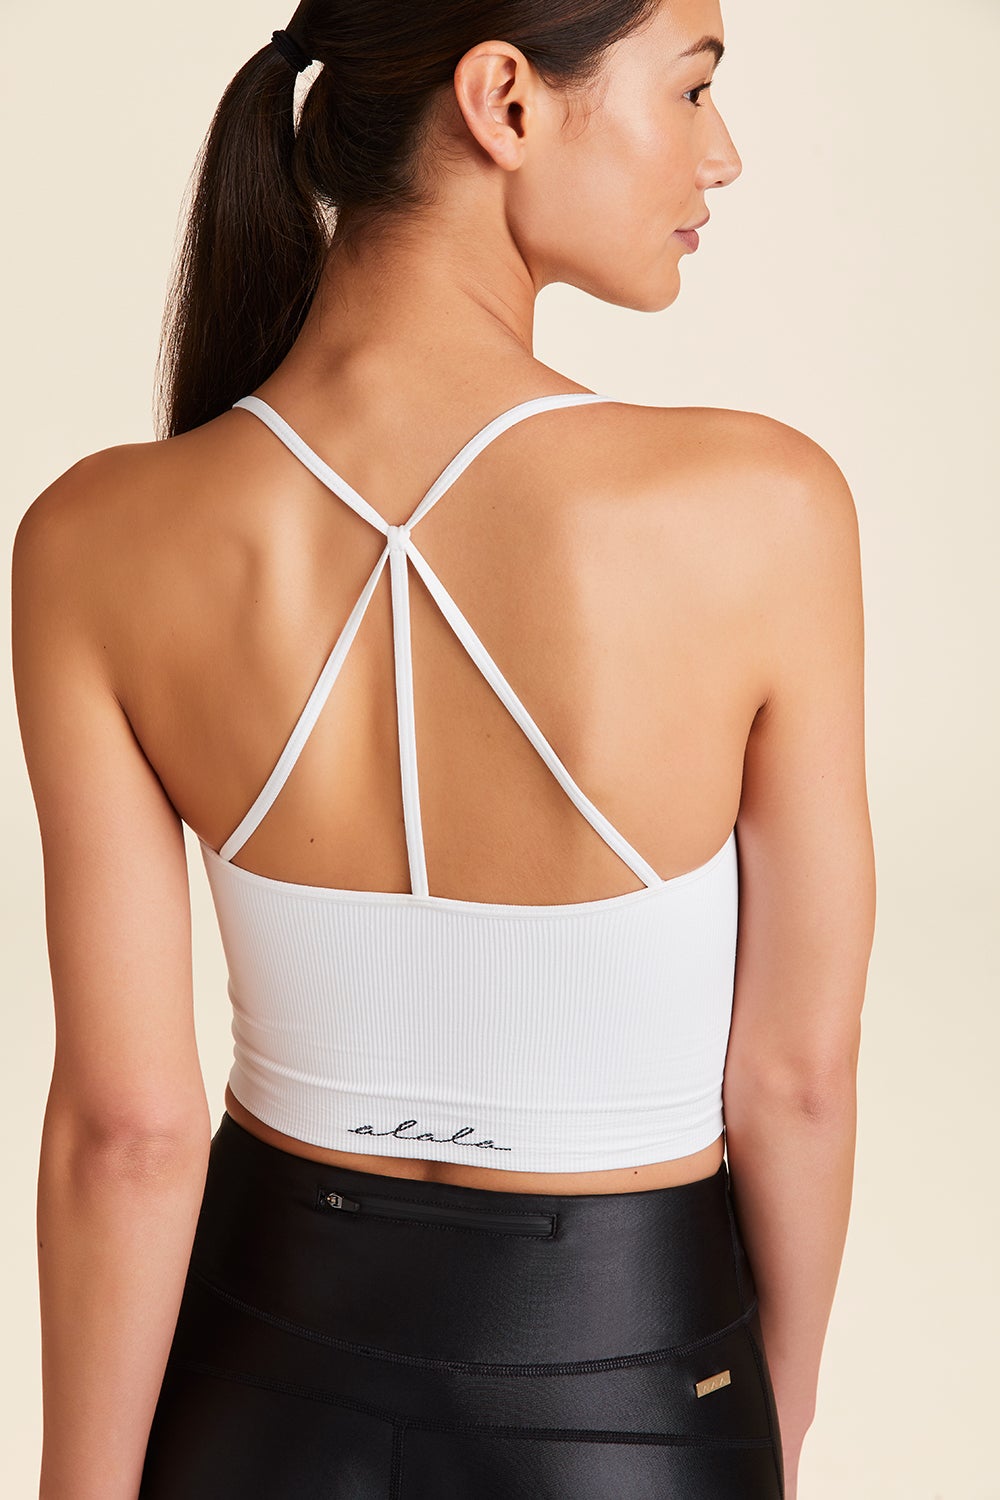 White seamless tank for women from Alala activewear